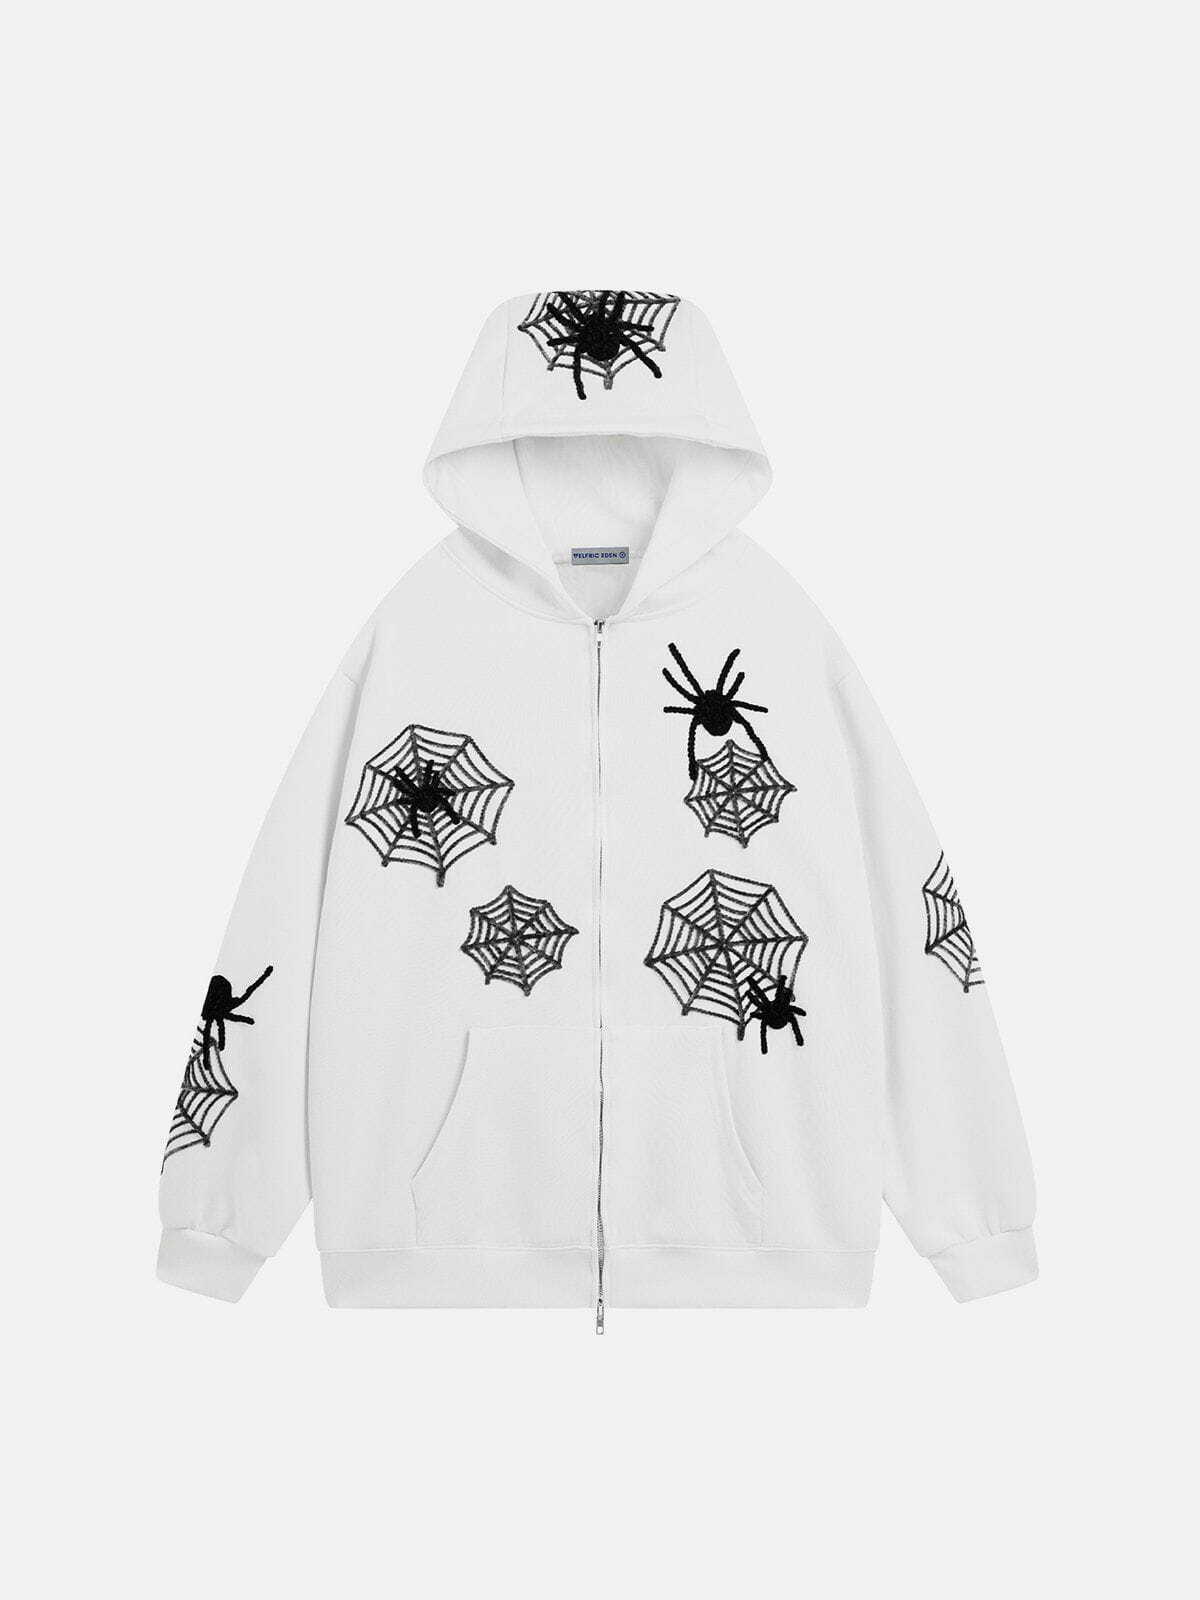 edgy 3d spider hoodie retro streetwear with a vibrant twist 5175